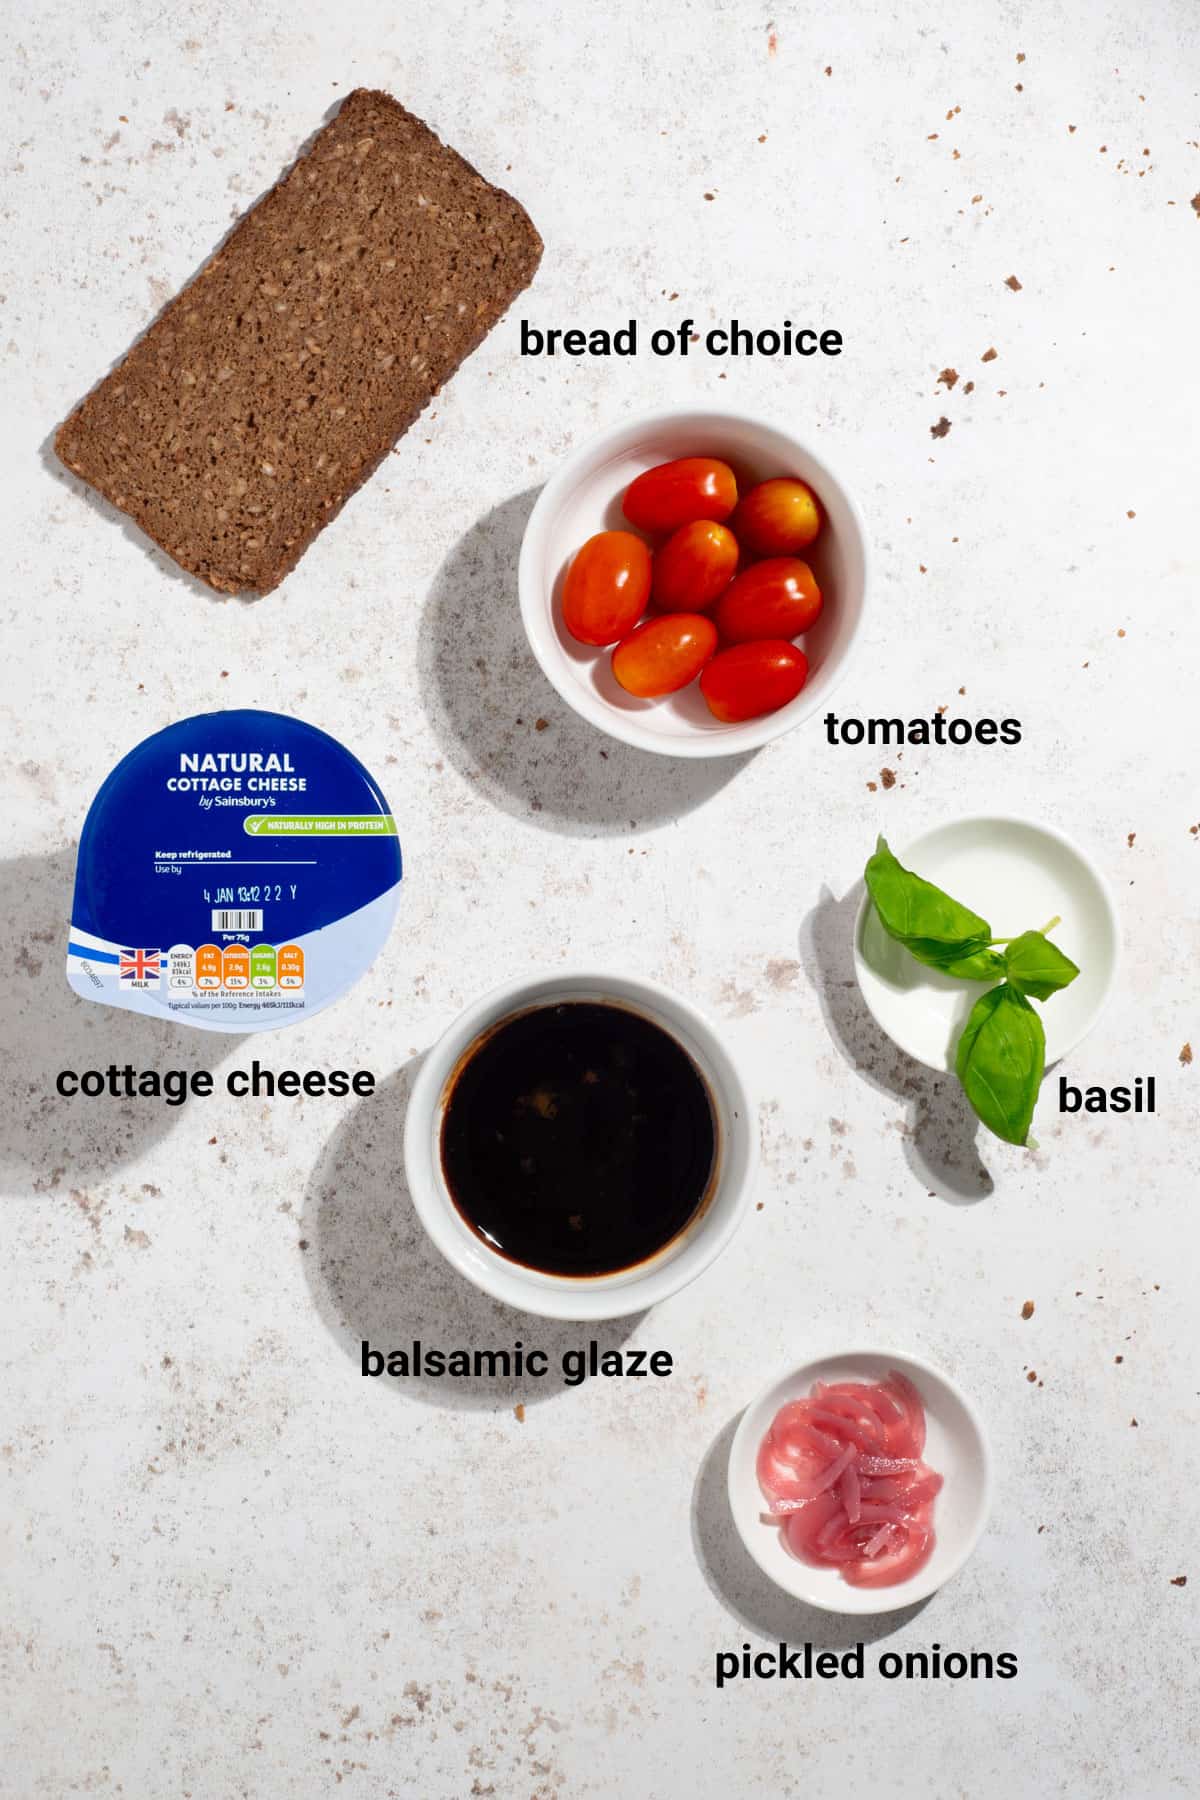 Tomato and basil toast ingredients.